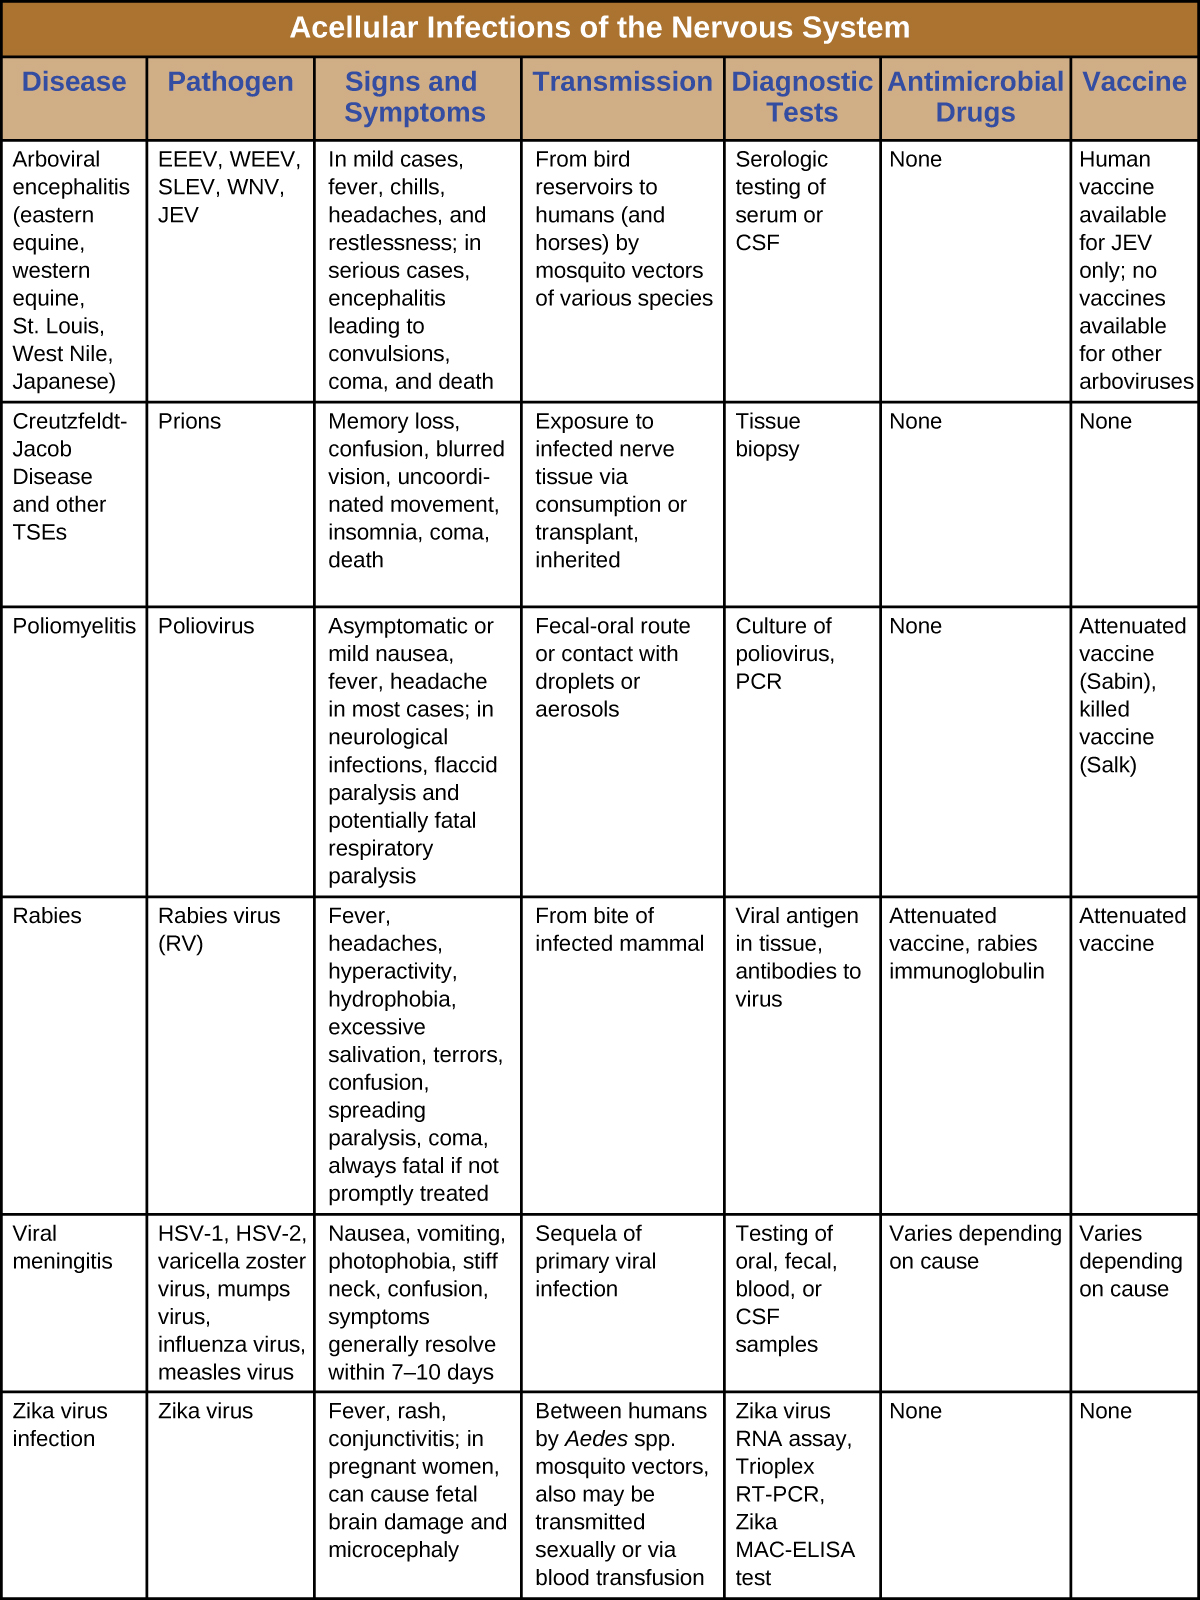 Table titled: Acellular Infections of the Nervous System. Columns: Disease; Pathogen; Signs and Symptoms; Transmission; Diagnostic Tests; Antimicrobial Drugs; Vaccine. Disease: Arboviral encephalitis (eastern equine, western equine, St. Louis, West Nile, Japanese); EEEV, WEEV, SLEV, WNV, JEV; In mild cases, fever, chills, headaches, and restlessness; in serious cases, encephalitis leading to convulsions, coma, and death; From bird reservoirs to humans (and horses) by mosquito vectors of various species; Serologic testing of serum or CSF; None; Human vaccine available for JEV only; no vaccines available for other arboviruses. Disease: Creutzfeldt-Jacob Disease and other TSEs; Prions; Memory loss, confusion, blurred vision, uncoordinated movement, insomnia, coma, death; Exposure to infected nerve tissue via consumption or transplant, inherited; Tissue biopsy; no drug or vaccine. Disease: Poliomyelitis; Poliovirus; Asymptomatic or mild nausea, fever, headache in most cases; in neurological infections, flaccid paralysis and potentially fatal respiratory paralysis; Fecal-oral route or contact with droplets or aerosols ; Culture of poliovirus, PCR; None; Attenuated vaccine (Sabin), killed vaccine (Salk). Disease: Rabies; Rabies virus (RV); Fever, headaches, hyperactivity, hydrophobia, excessive salivation, terrors, confusion, spreading paralysis, coma, always fatal if not promptly treated; From bite of infected mammal; Viral antigen in tissue, antibodies to virus; Attenuated vaccine, rabies immunoglobulin; Attenuated vaccine. Disease: Viral meningitis; HSV-1, HSV-2, varicella zoster virus, mumps virus, influenza virus, measles virus; Nausea, vomiting, photophobia, stiff neck, confusion, symptoms generally resolve within 7–10 days; Sequela of primary viral infection; Testing of oral, fecal, blood, or CSF samples; Varies depending on cause; Varies depending on cause. Disease: Zika virus infection; Zika virus Fever, rash, conjunctivitis; in pregnant women, can cause fetal brain damage and microcephaly; Between humans by Aedes spp. mosquito vectors, also may be transmitted sexually or via blood transfusion; Zika virus RNA assay, Trioplex RT-PCR, Zika MAC-ELISA test; No drug or vaccine.